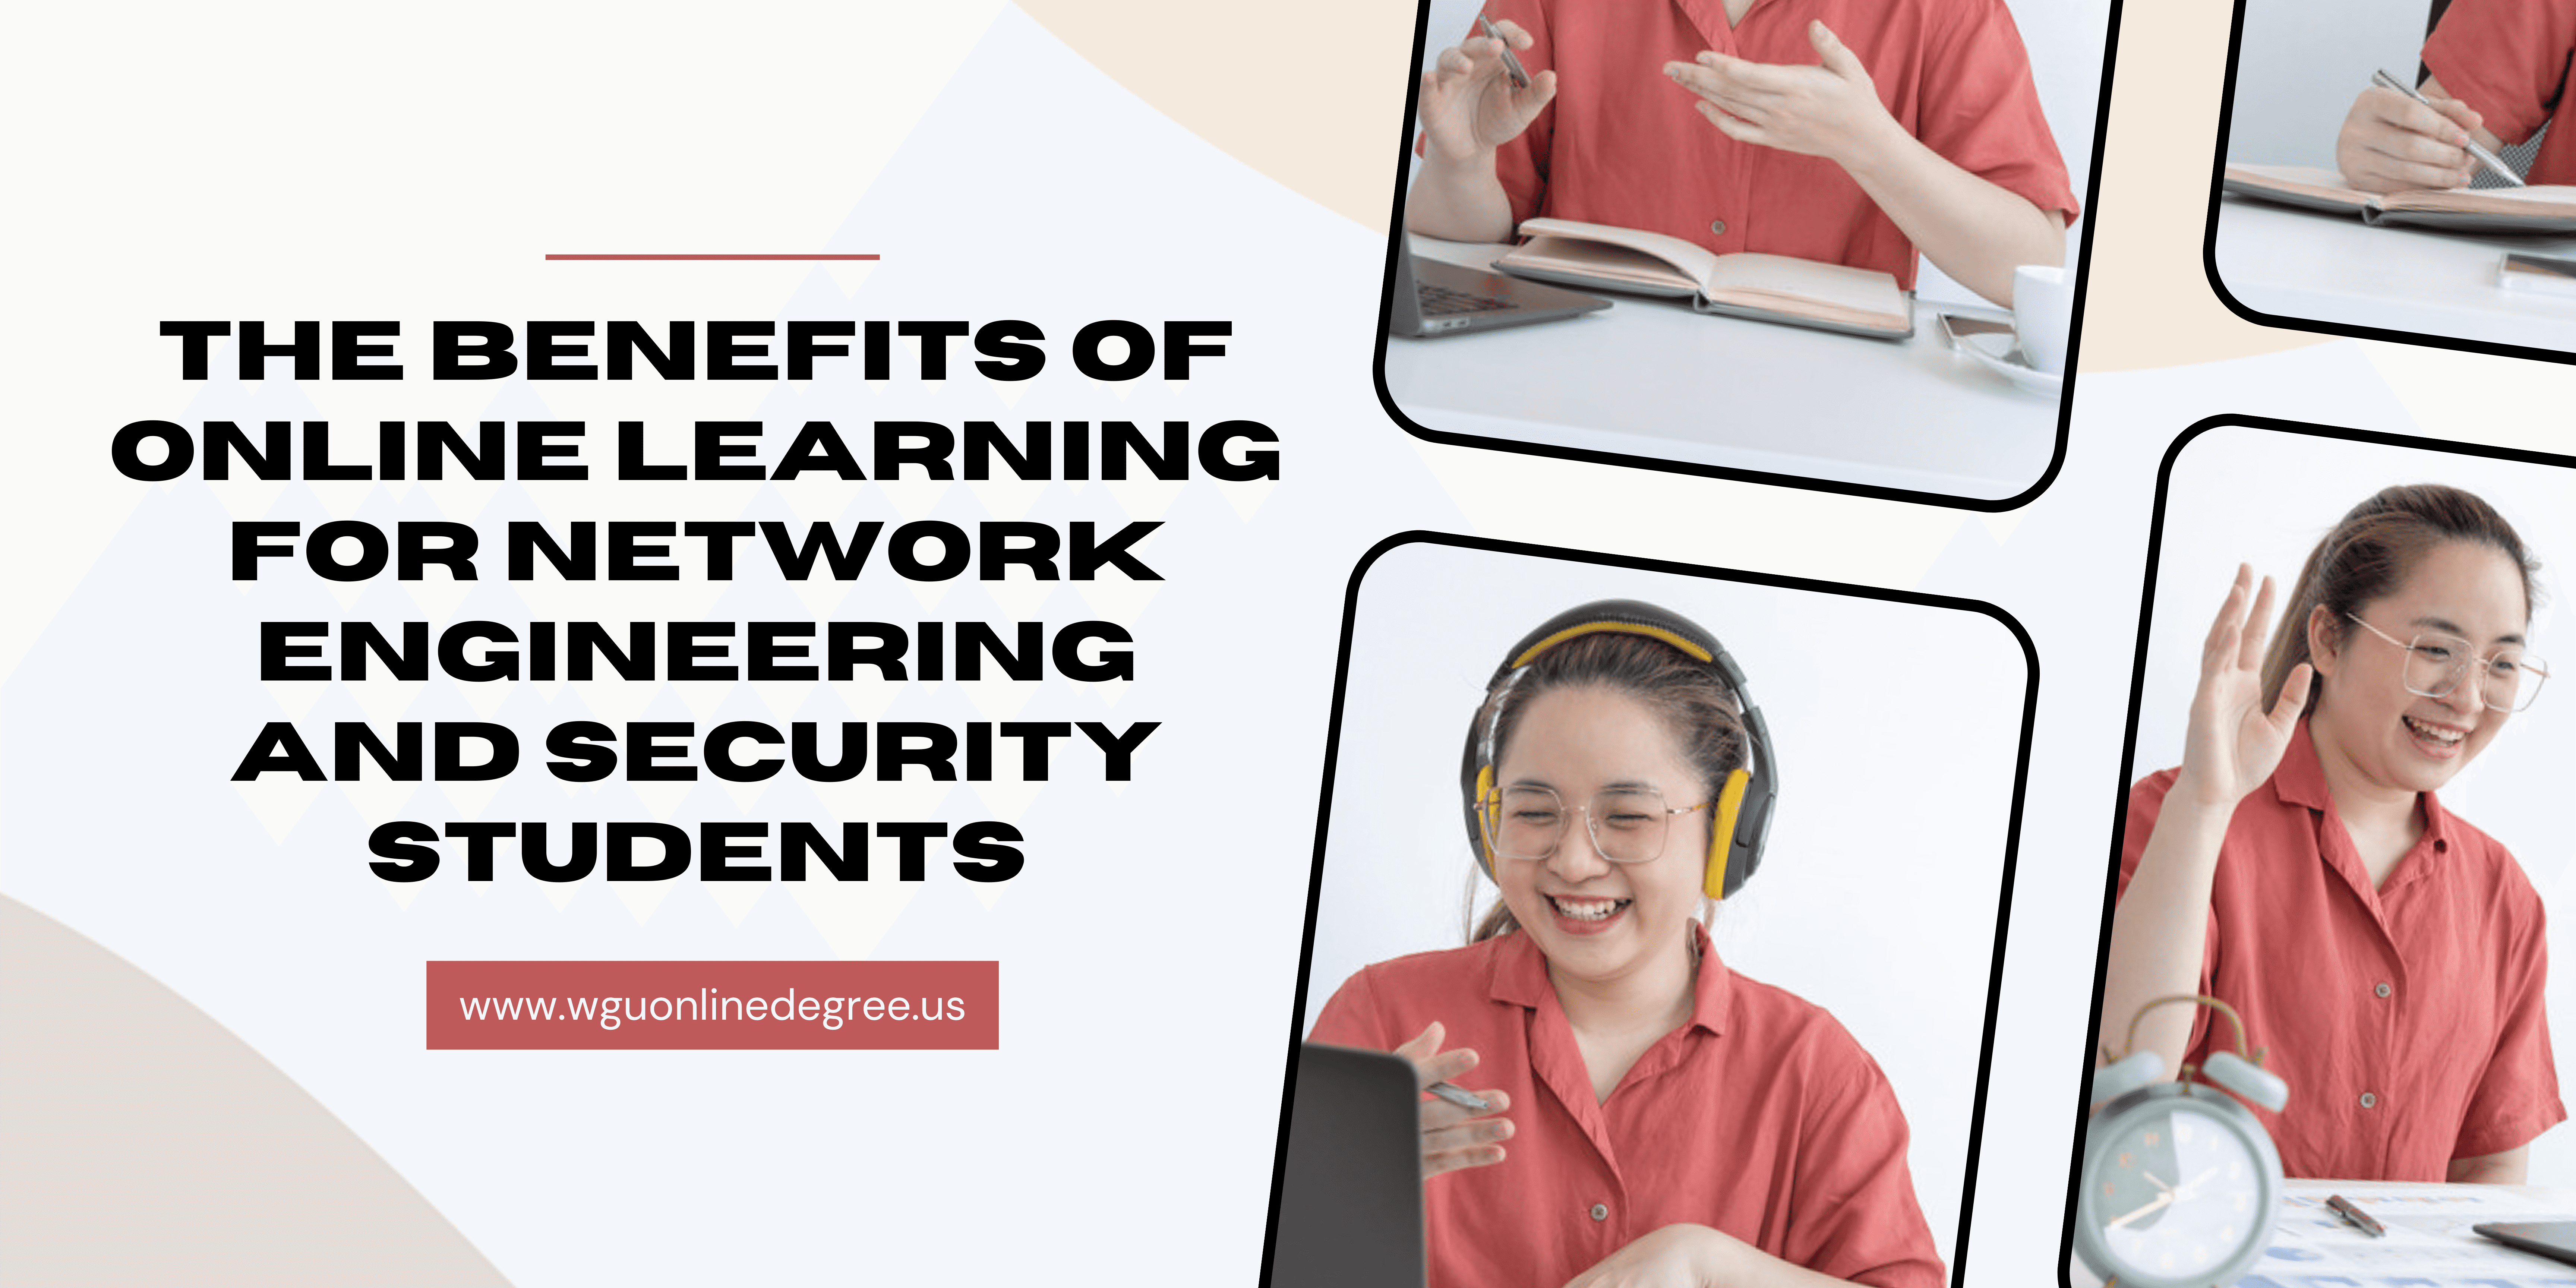 The Benefits of Online Learning for Network Engineering and Security Students